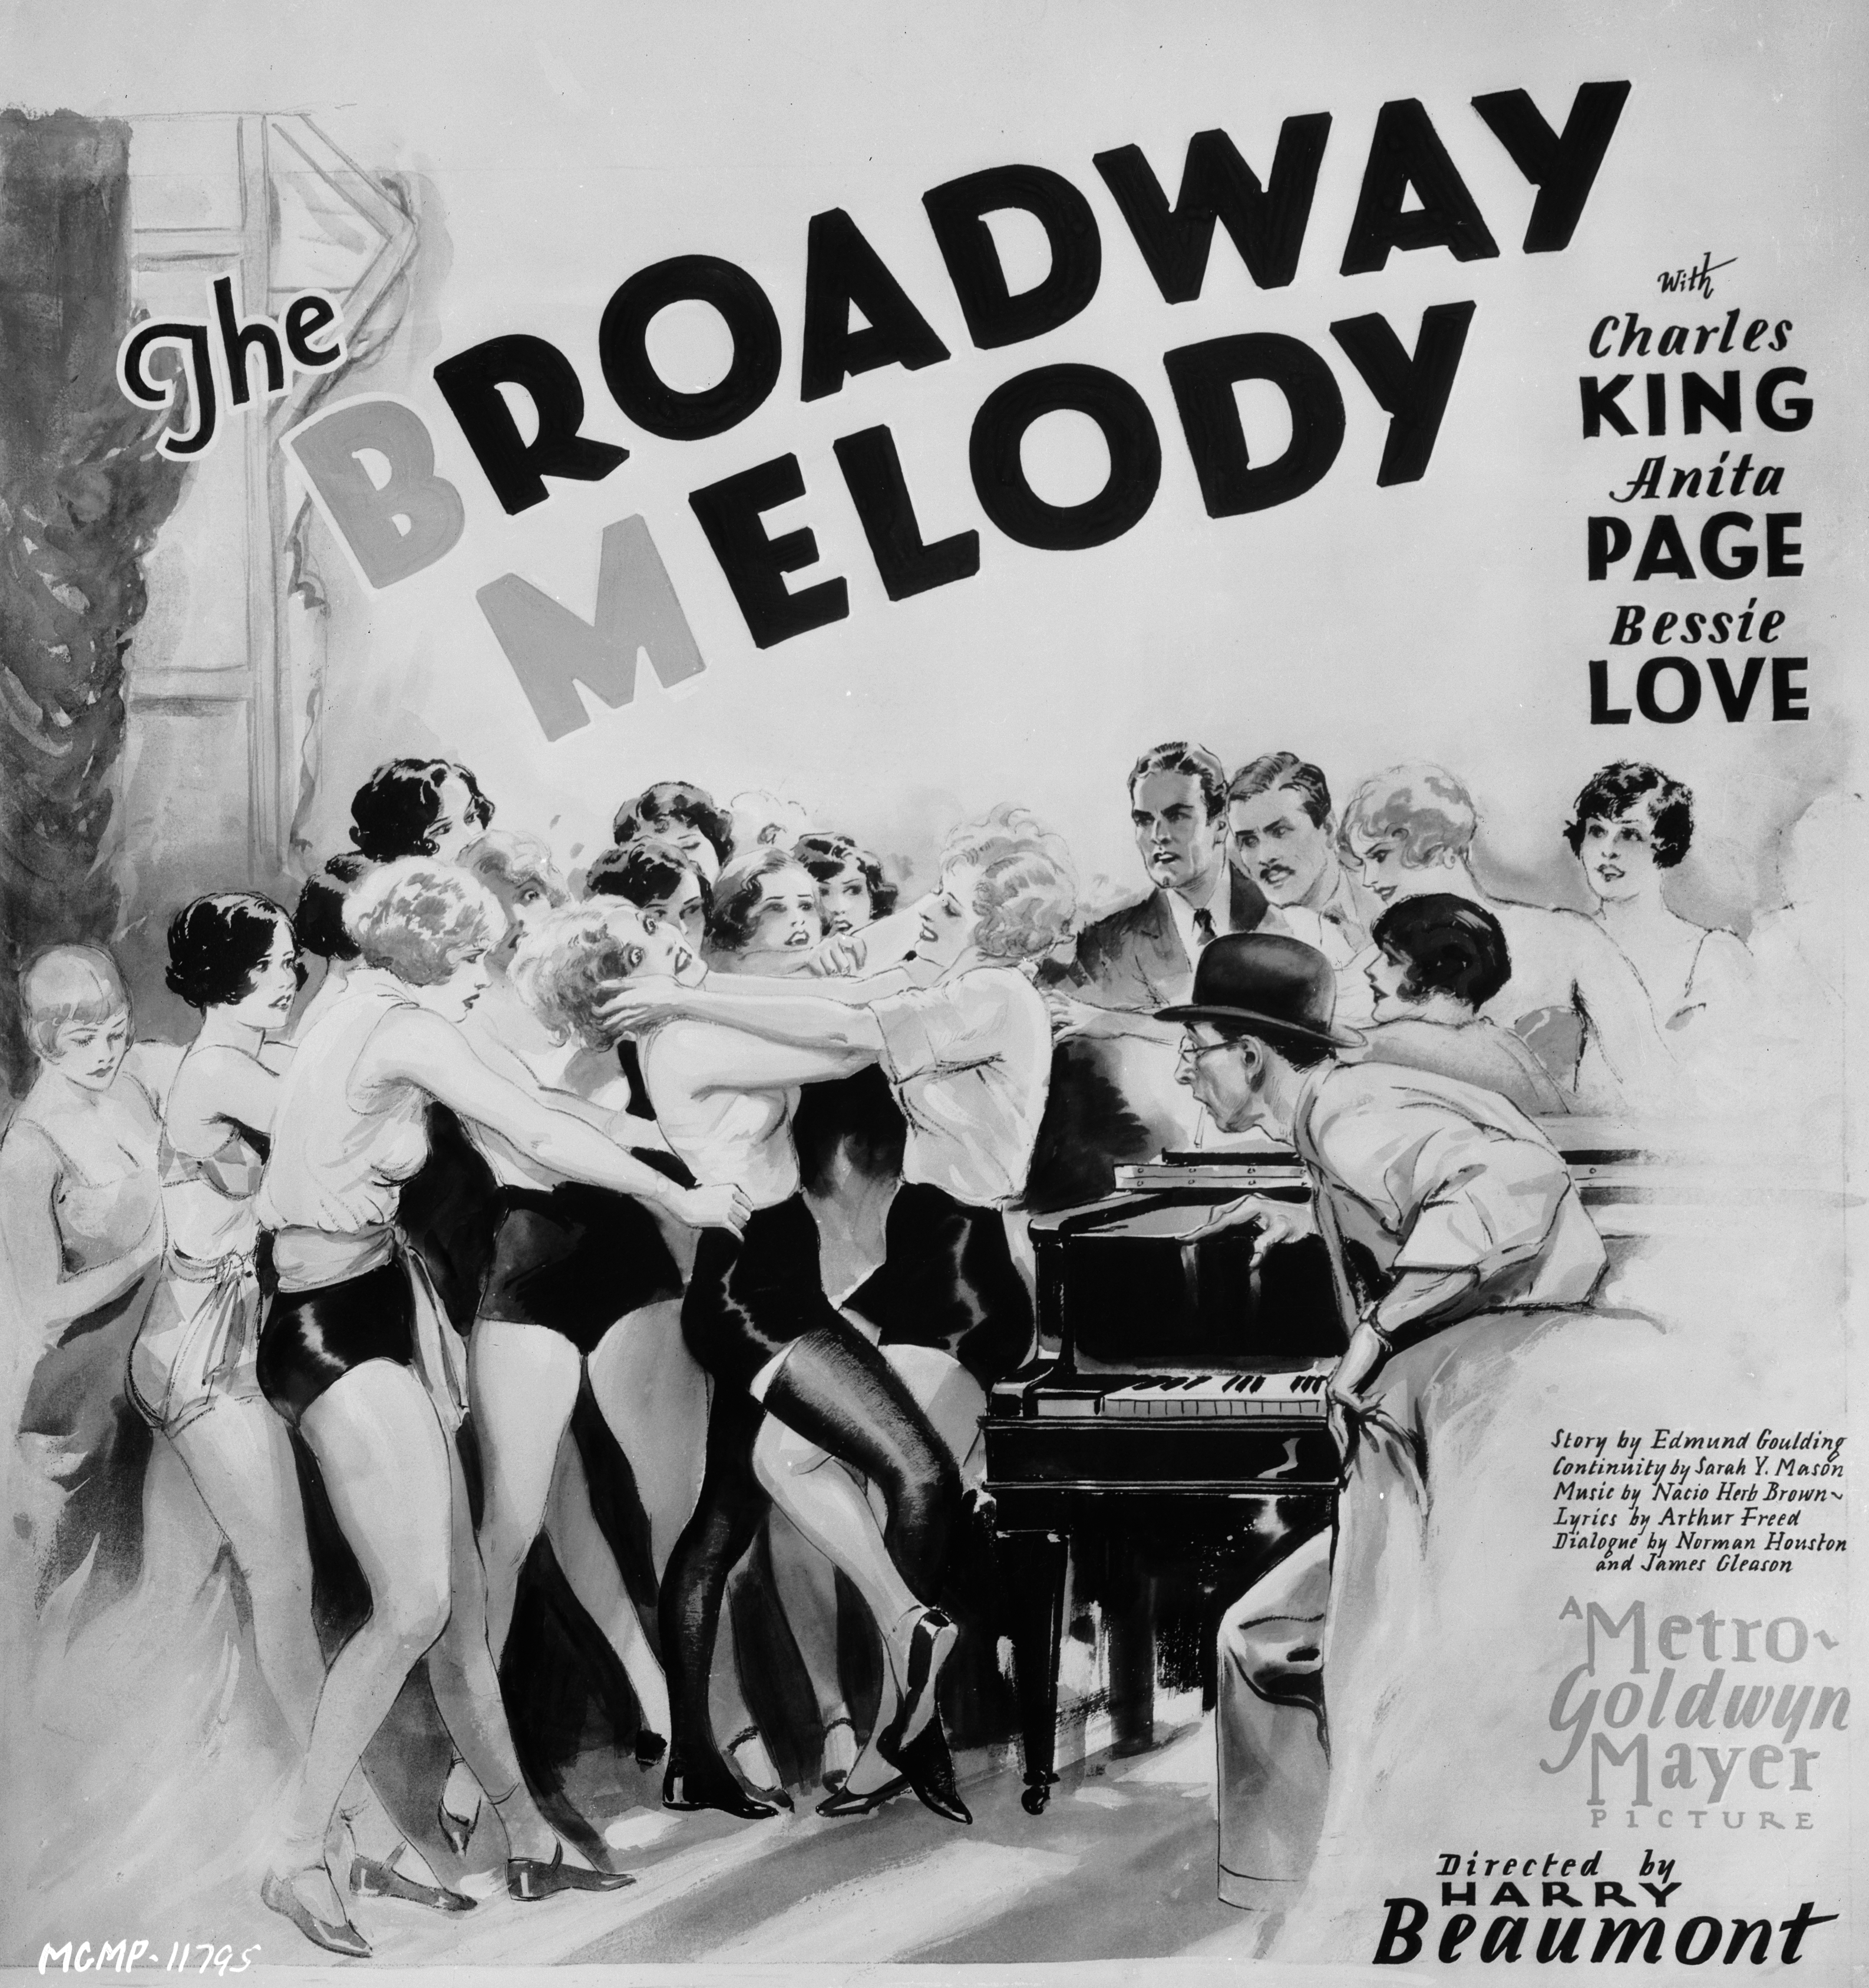 Nacio Herb Brown, Arthur Freed, Charles King, Bessie Love and Anita Page in The Broadway Melody (1929)